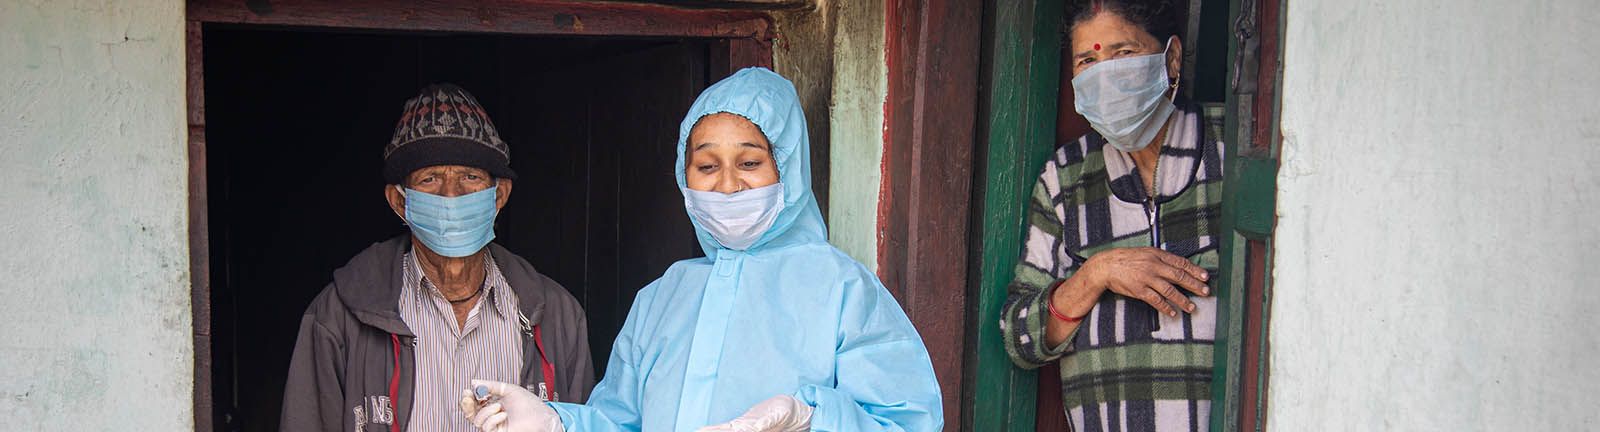 An India woman in blue PPE stands between a man and a woman both wearing face masks